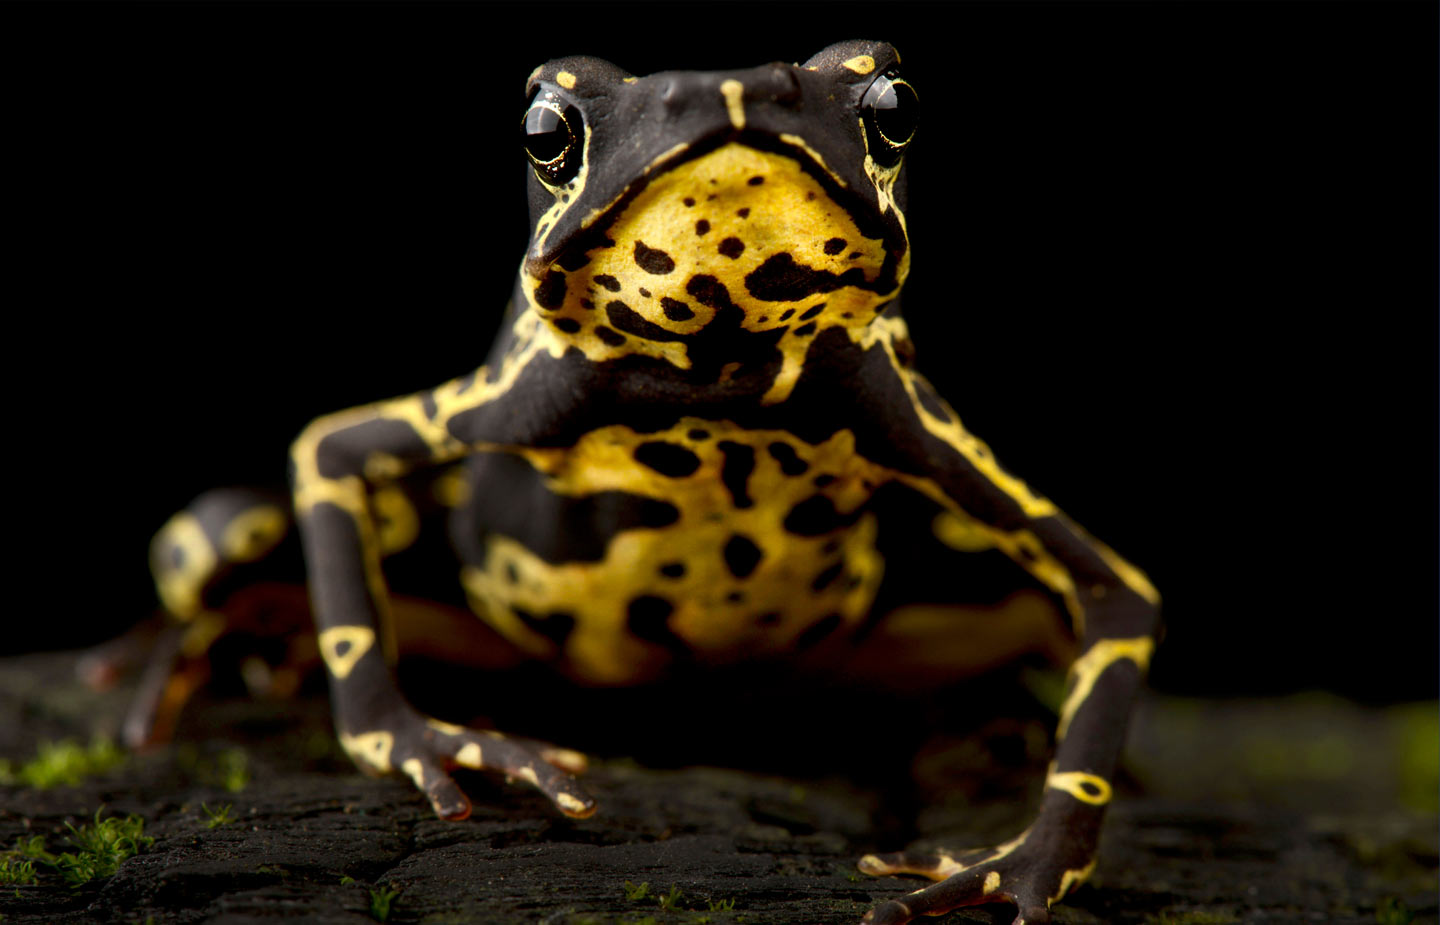 Image of a black and yellow tropical frog